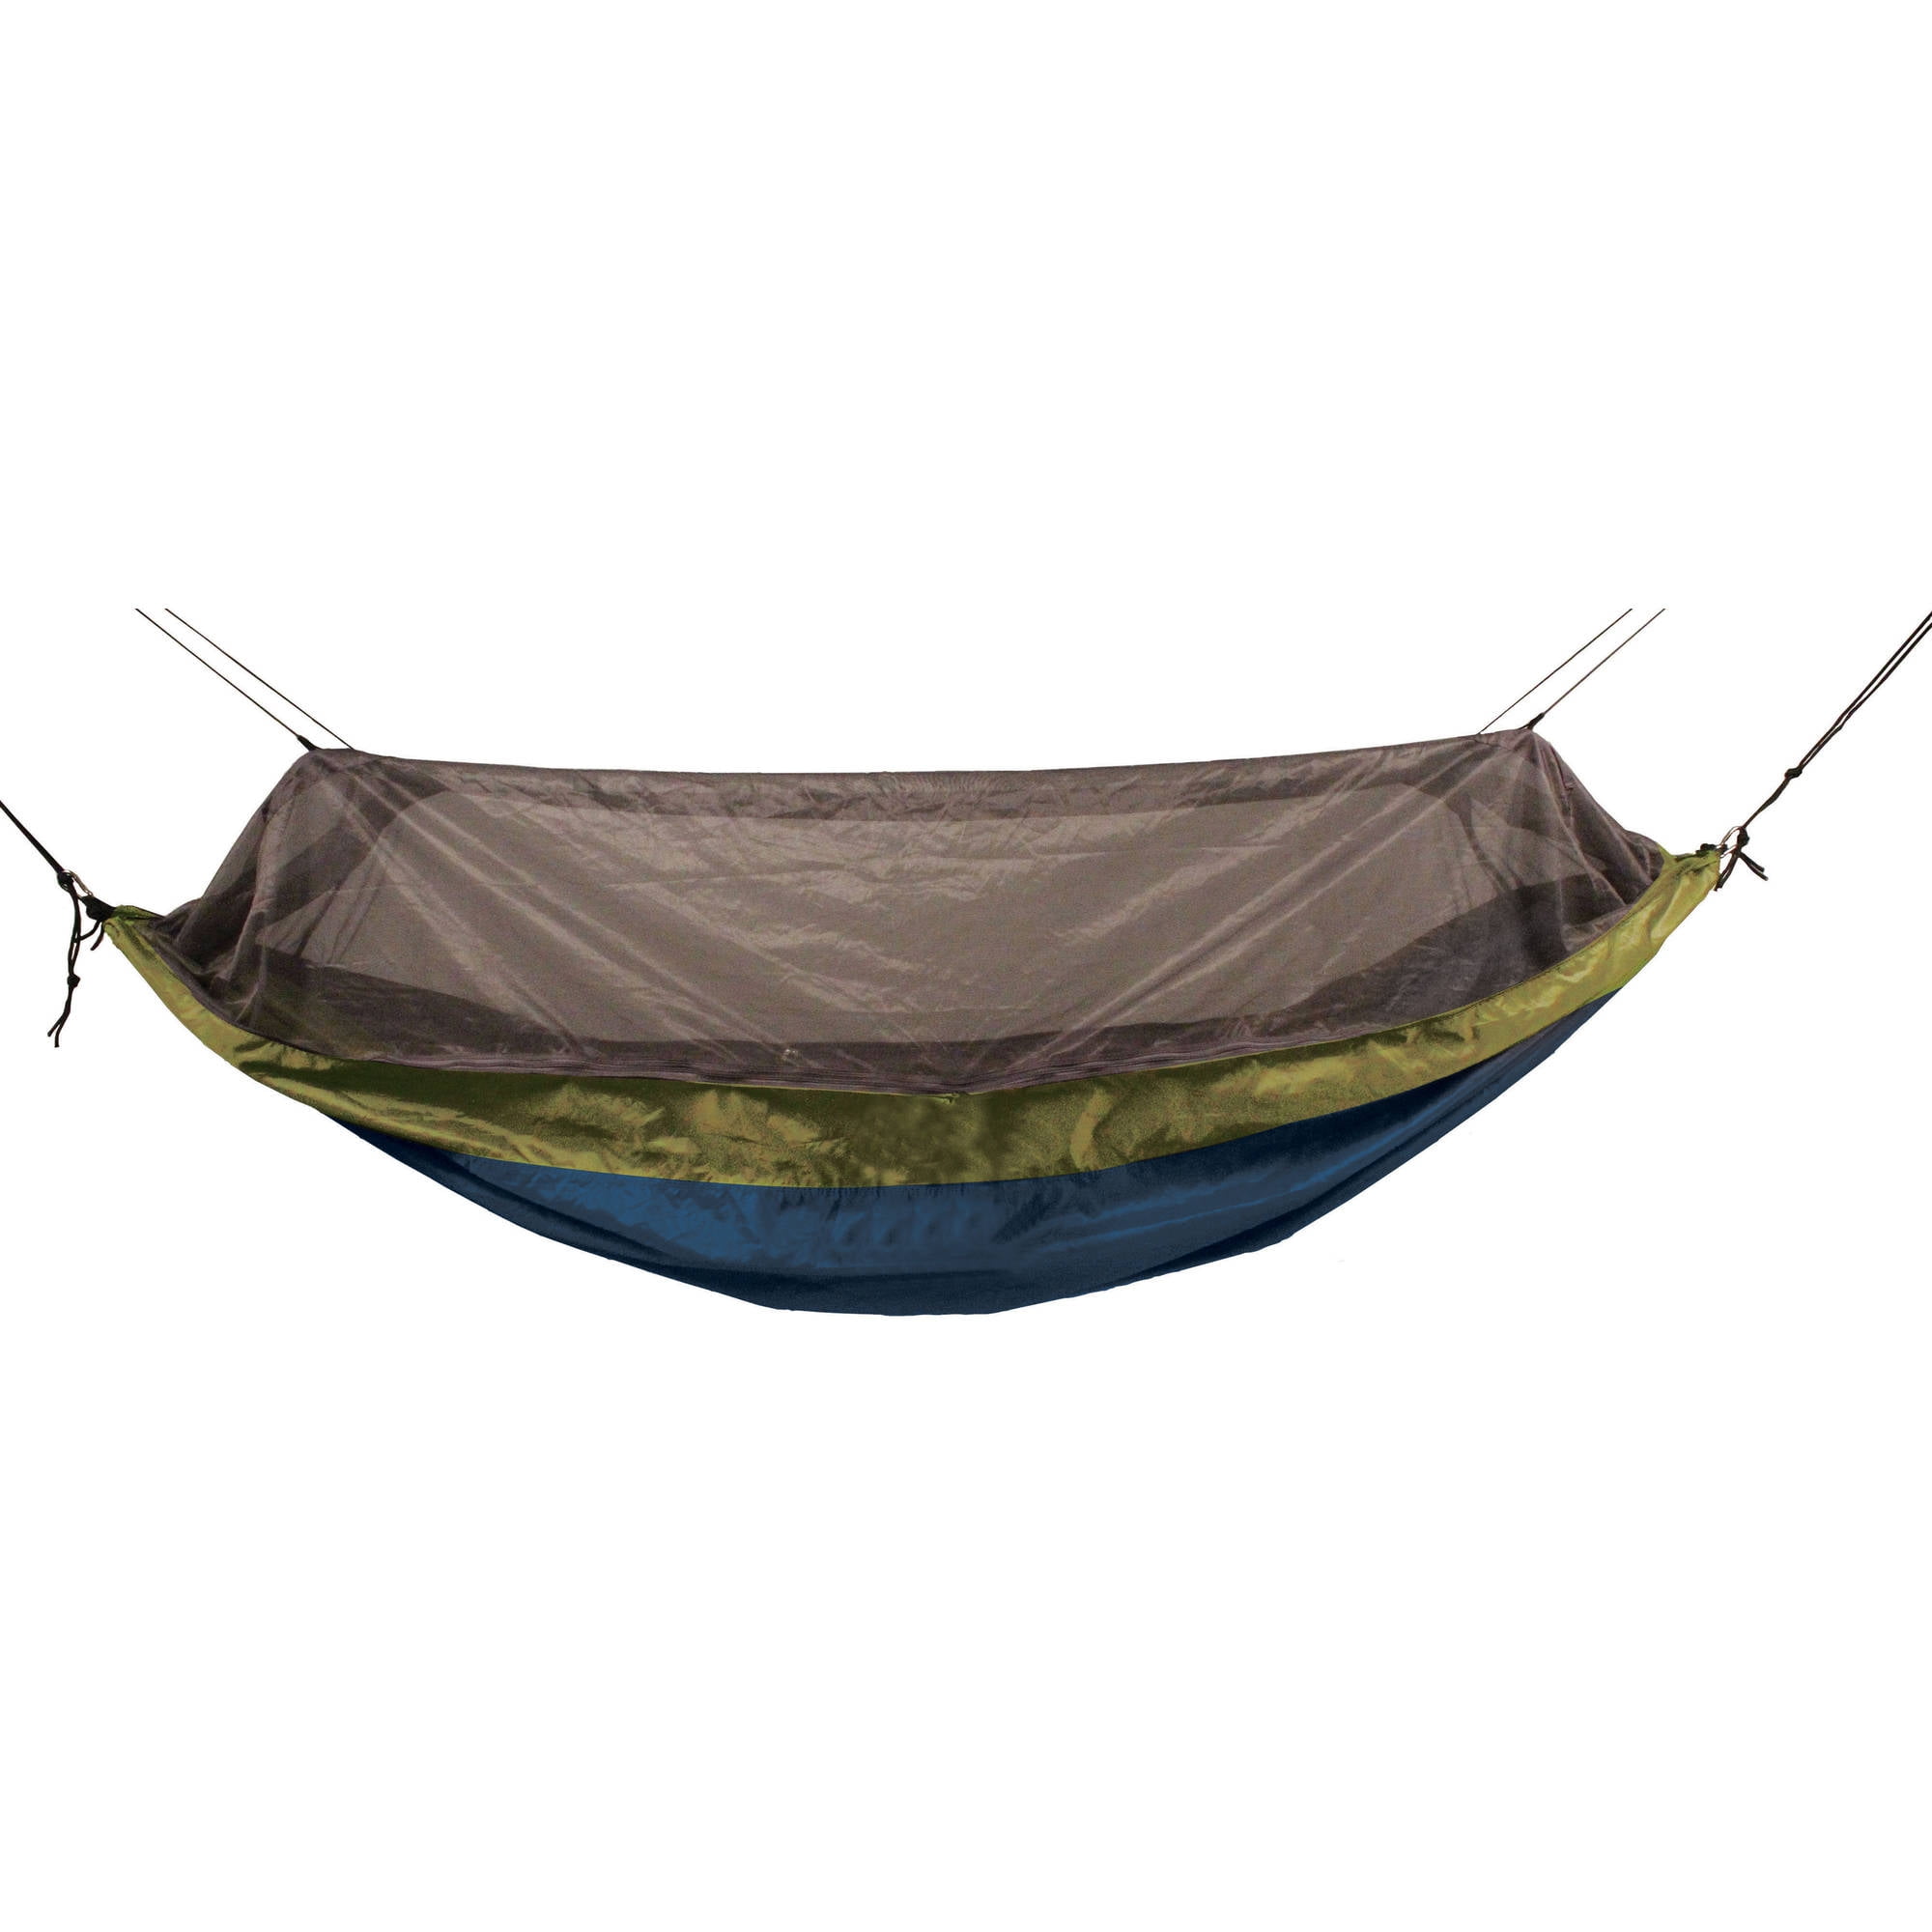 Meedogenloos manipuleren bevestig alstublieft Equip Nylon Mosquito Hammock with Attached Bug Net, 1 Person Red and Taupe,  Open Size 115" L x 59" W - Walmart.com